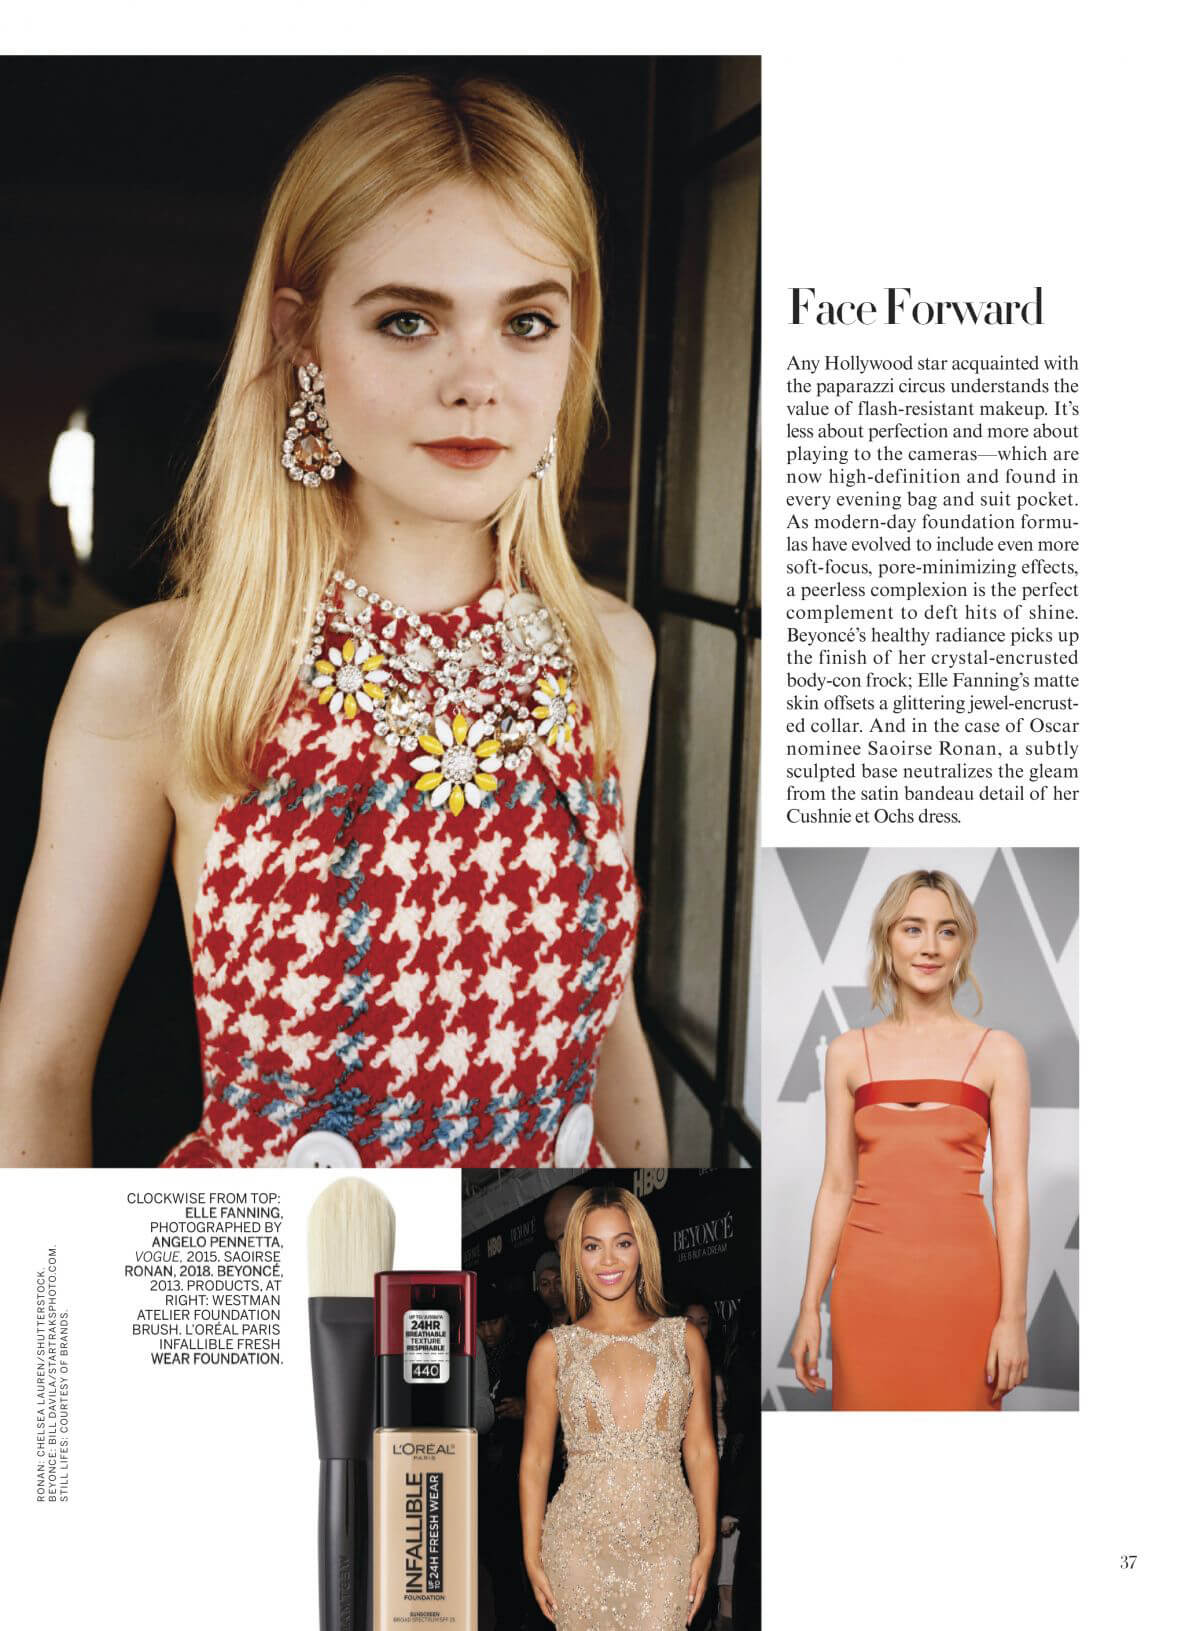 Elle Fanning in Vogue Magazine, January 2019